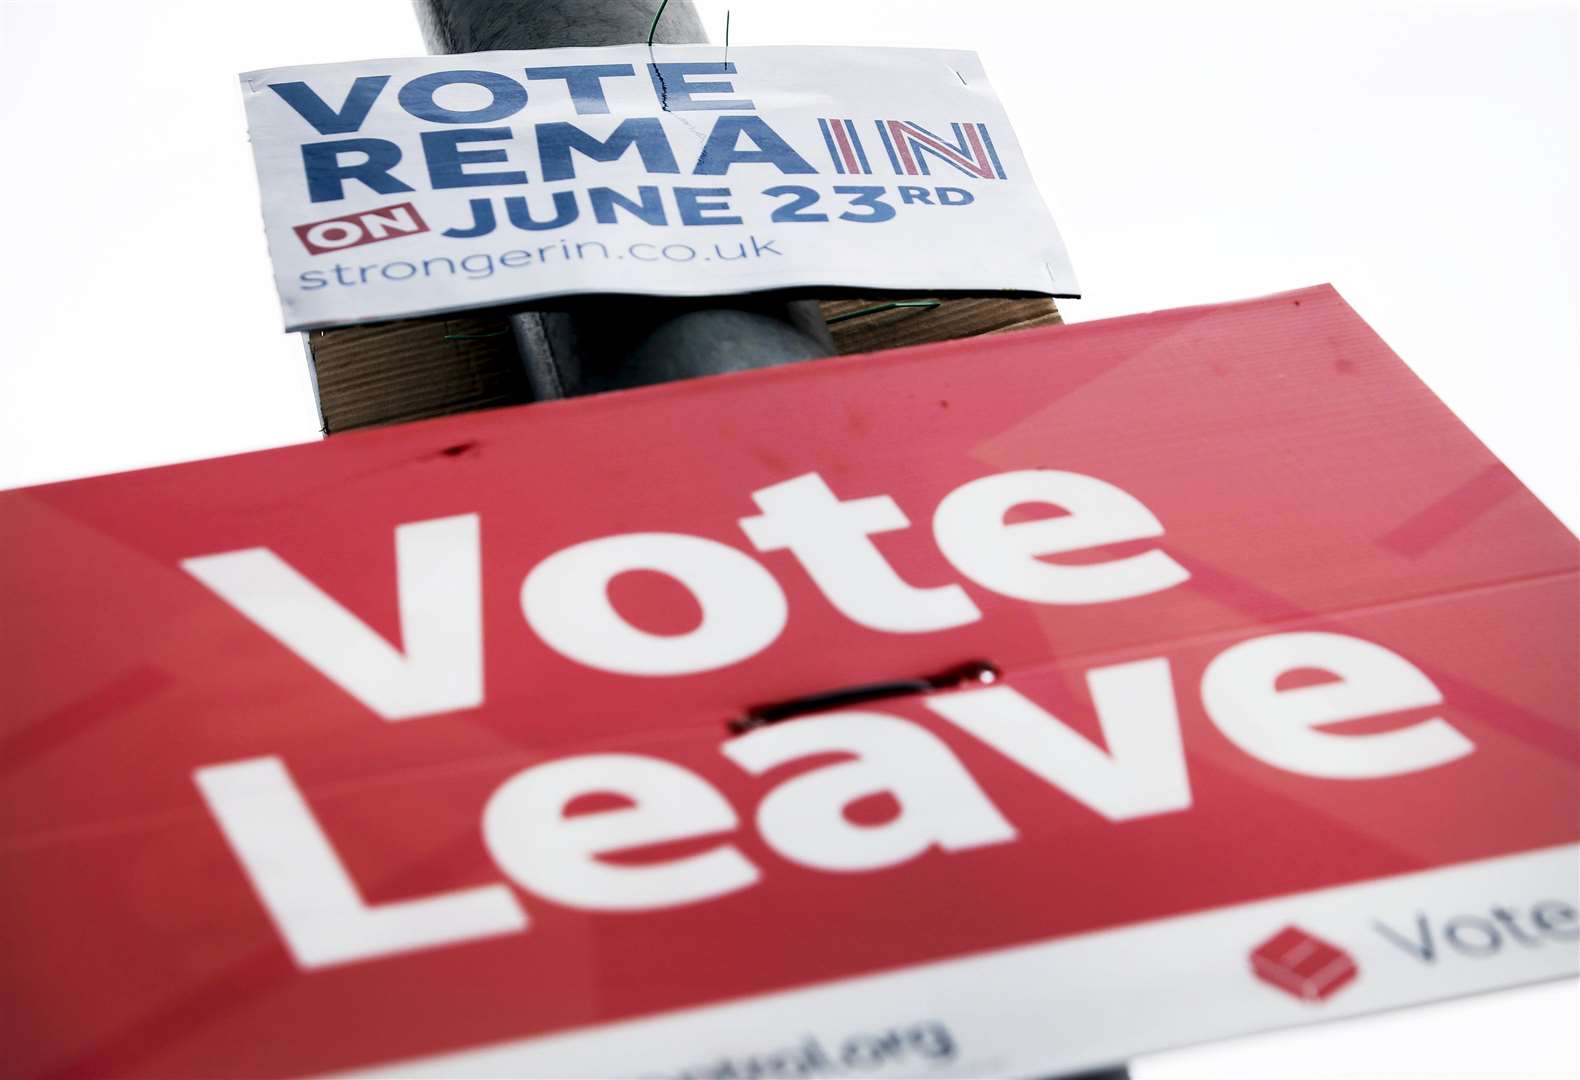 Vote Remain and Vote Leave signs on a lamppost in Leeds (Danny Lawson/PA)